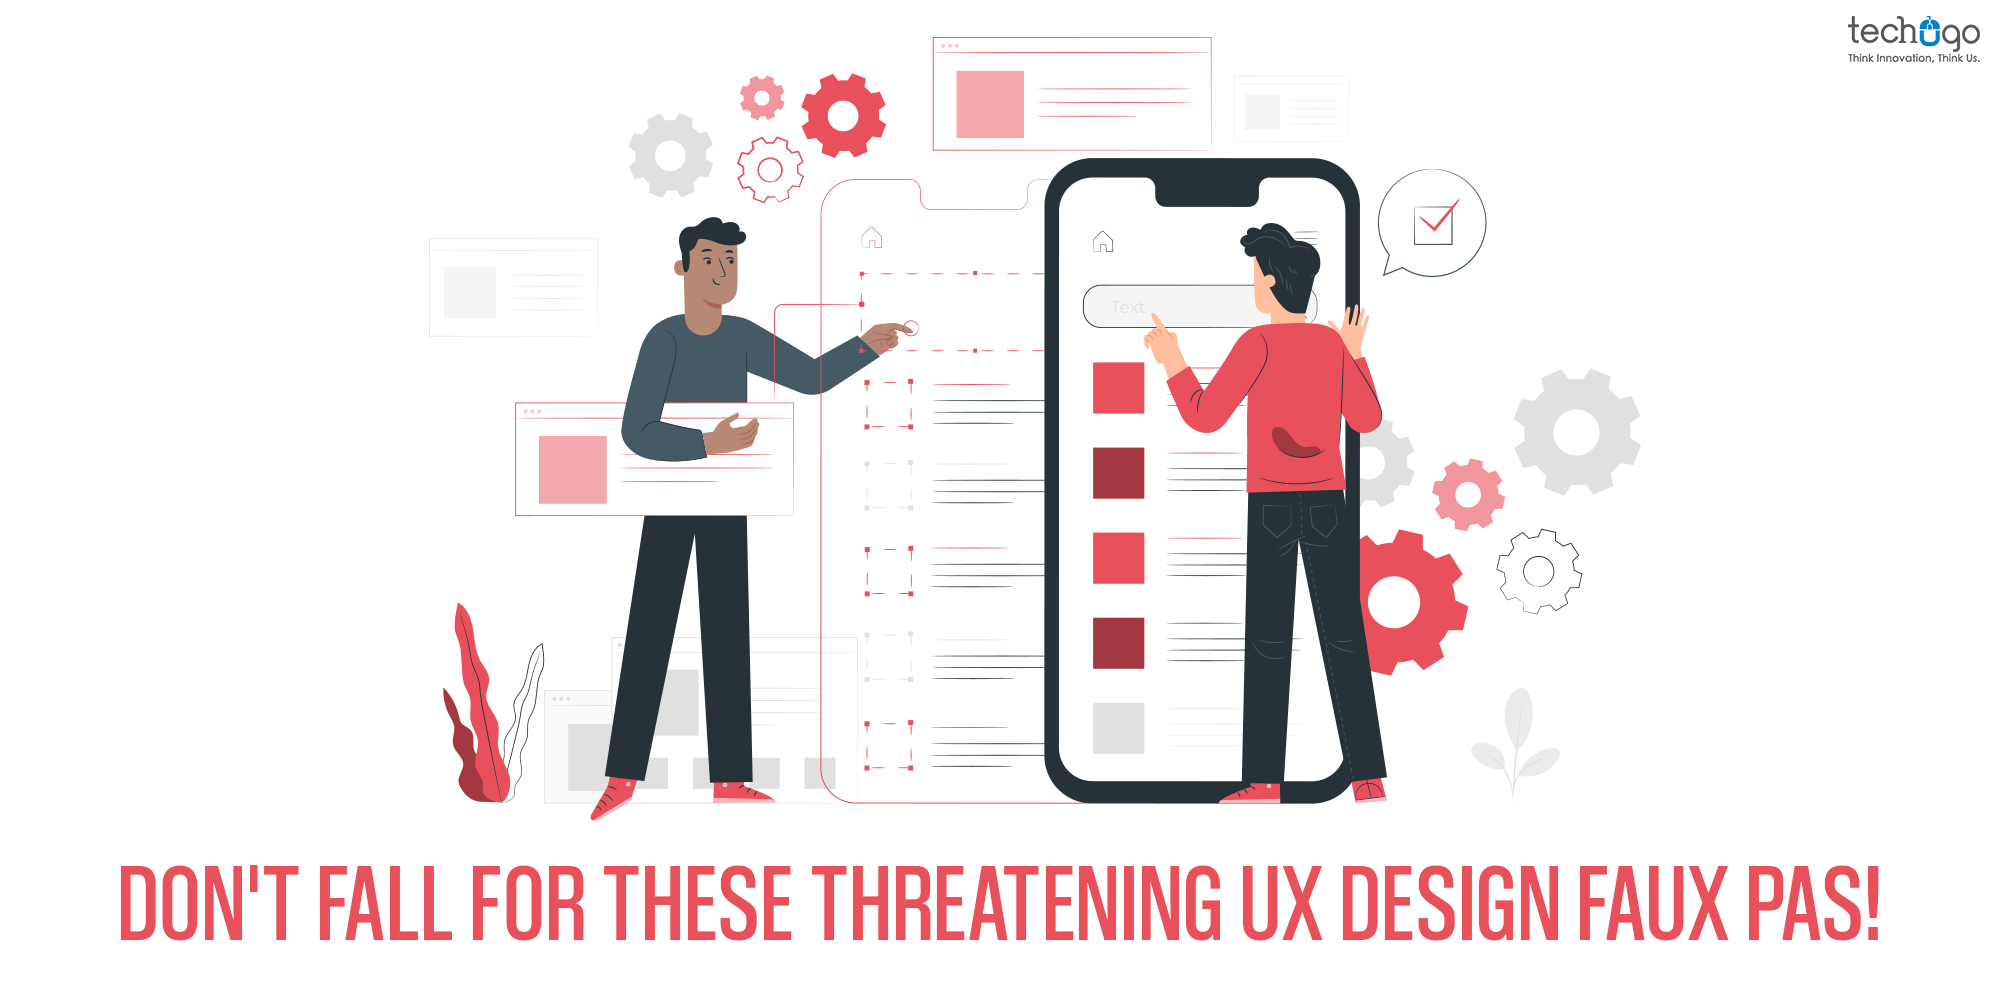 Don’t Fall For These Threatening UX Design Faux Pas!